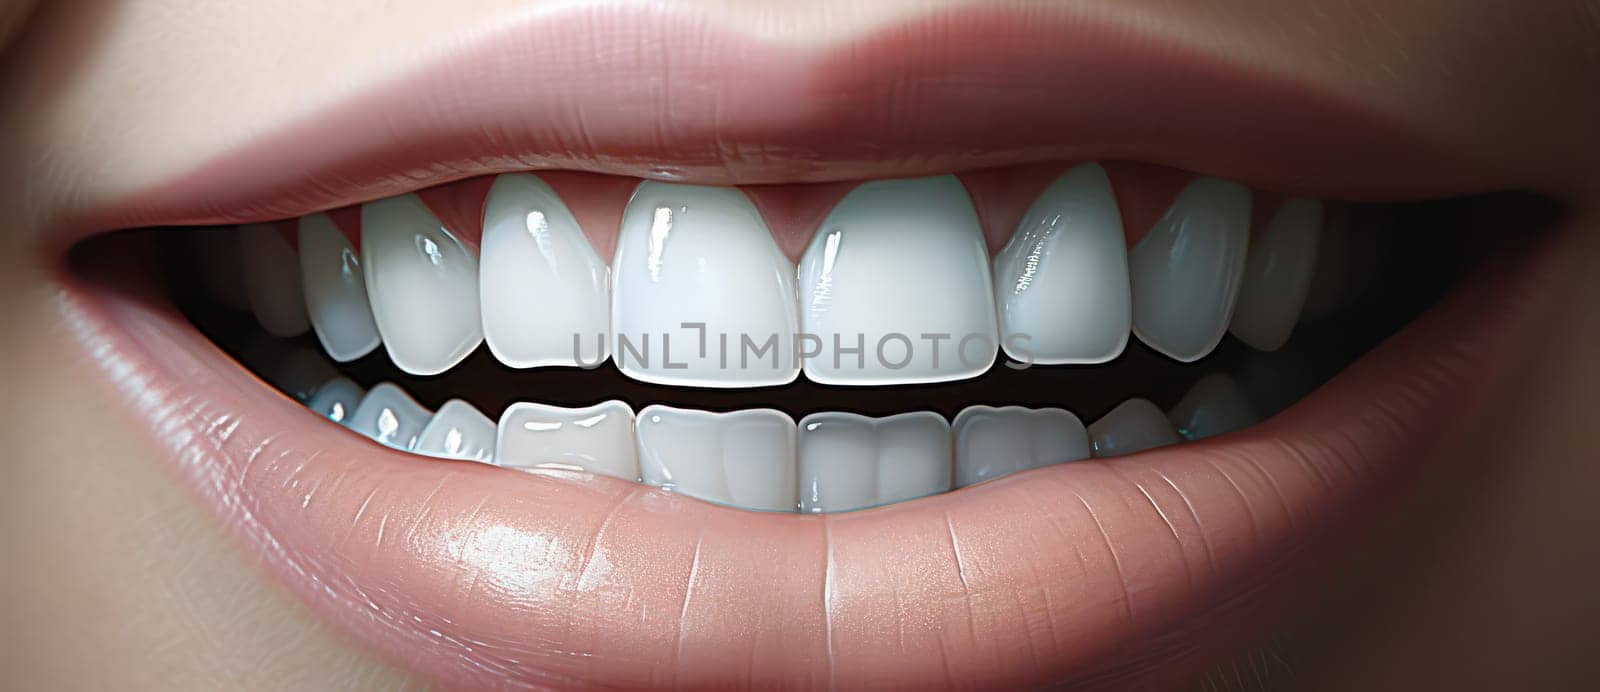 Healthy Dental Care: Close-Up of a Smiling Young Woman with White Teeth and Fresh Lips. by Vichizh